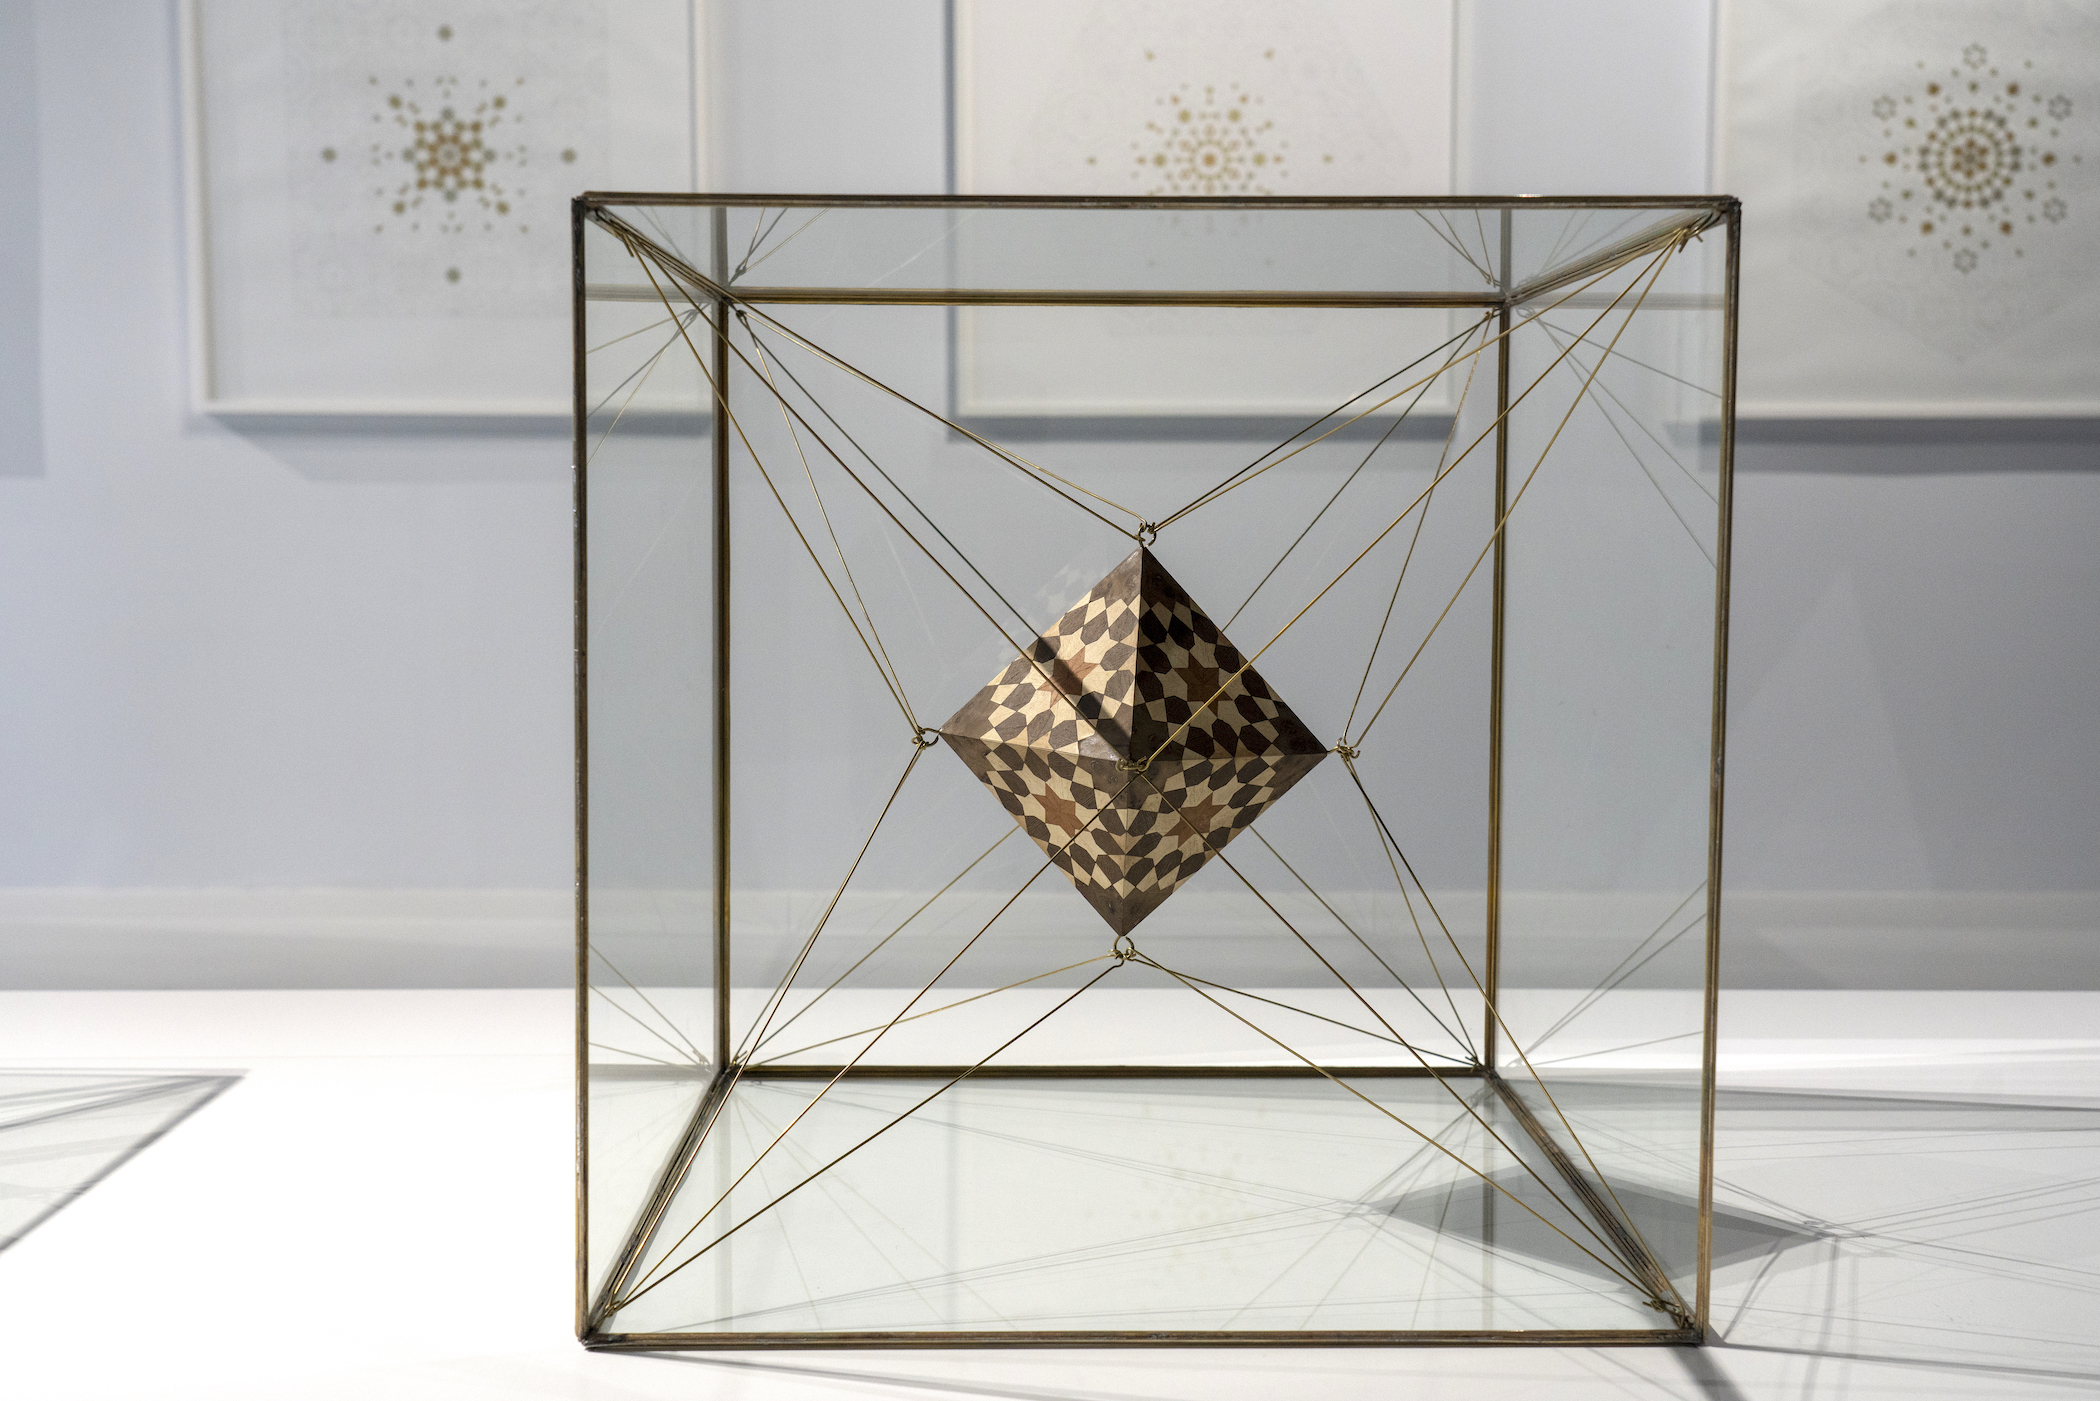 Installation shot of Octahedron Within a Cube II from The Platonic Solid Duals series, 2019, Wood, copper and brass, 121 x 100.2 x 100.2 cm. Image courtesy of Maraya Art Centre.